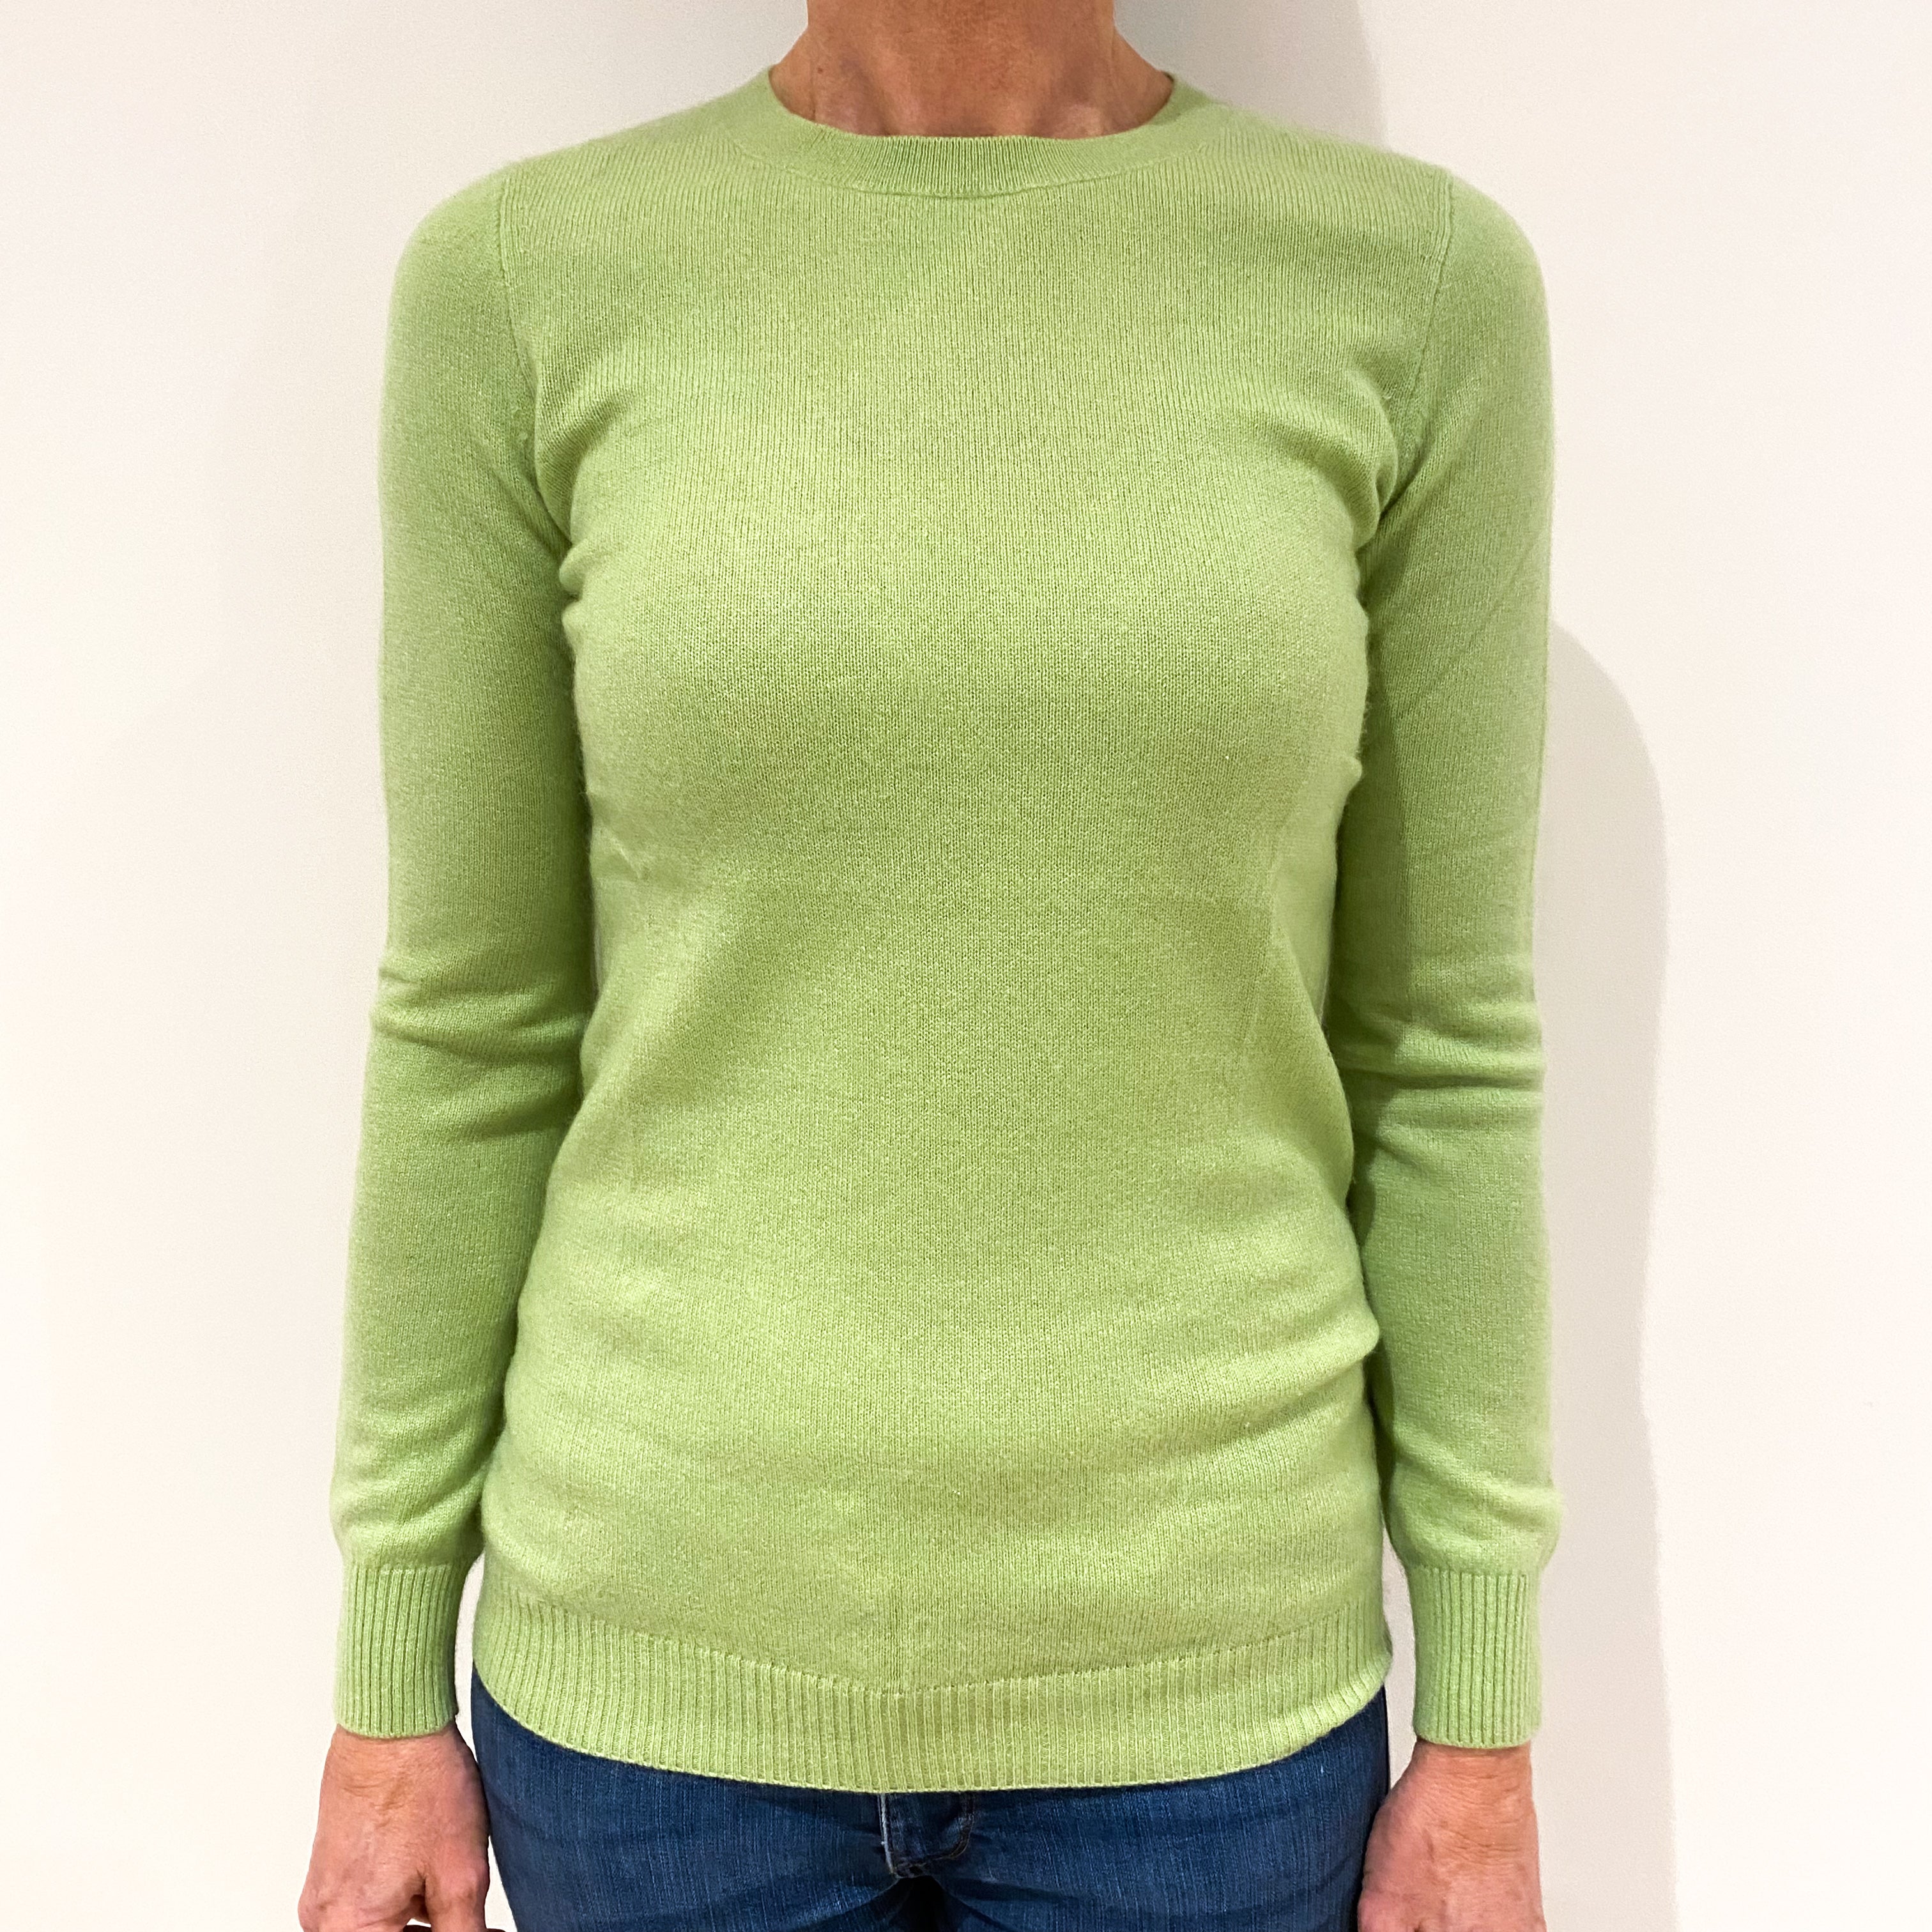 Soft Lime Cashmere Crew Neck Jumper Small